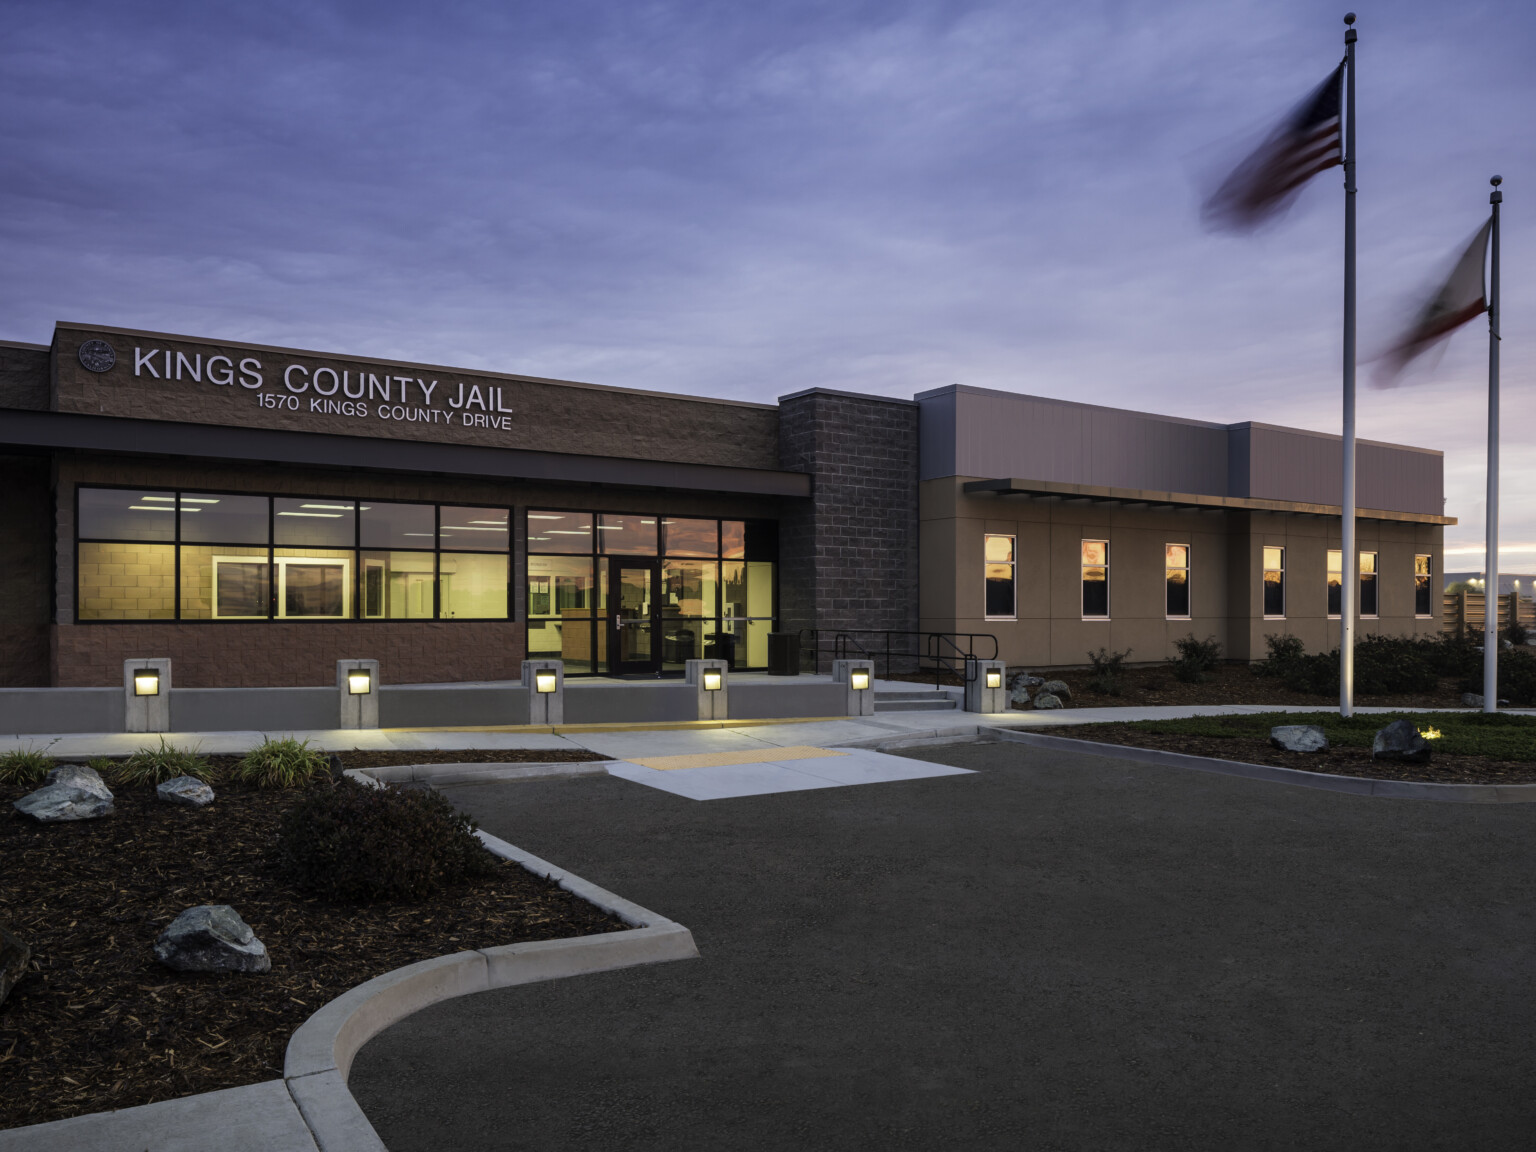 A picture of Kings County Jail at dusk